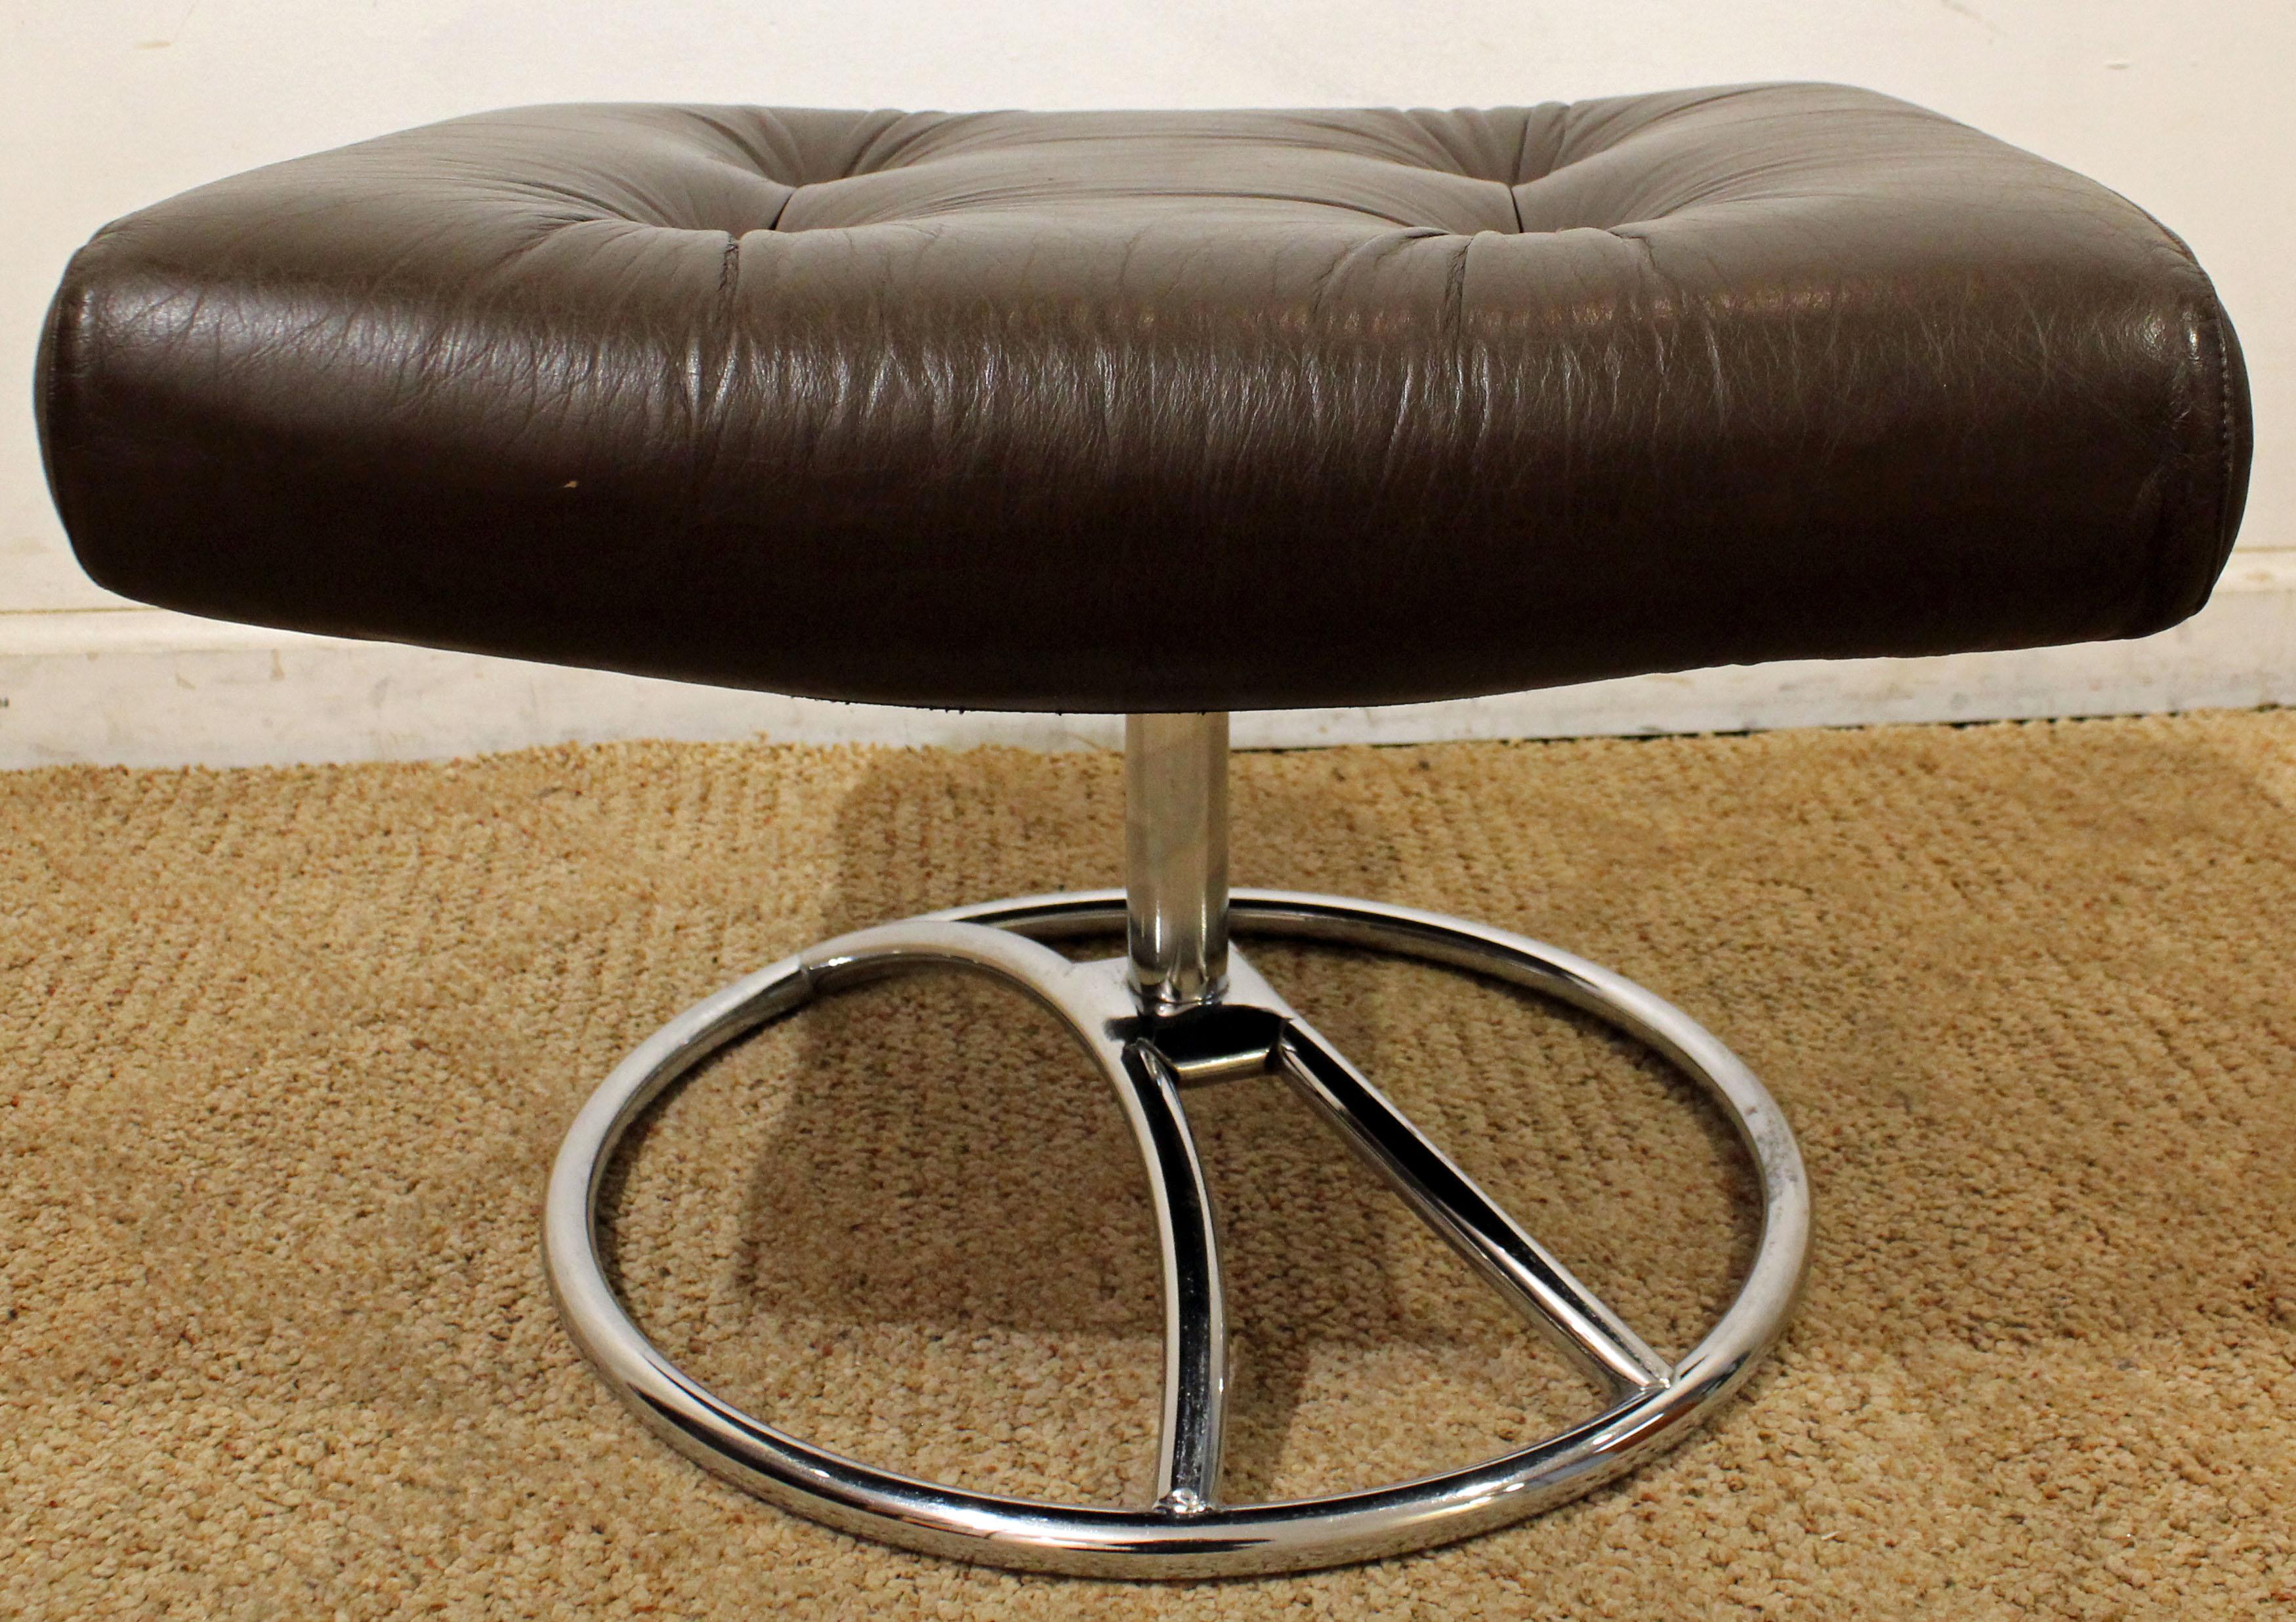 Offered is an Ekornes Stressless chrome leather ottoman. It is made of leather and chrome, and it swivels. This piece is in good condition, shows some age wear. It is not signed.

Approximate dimensions:
21.5